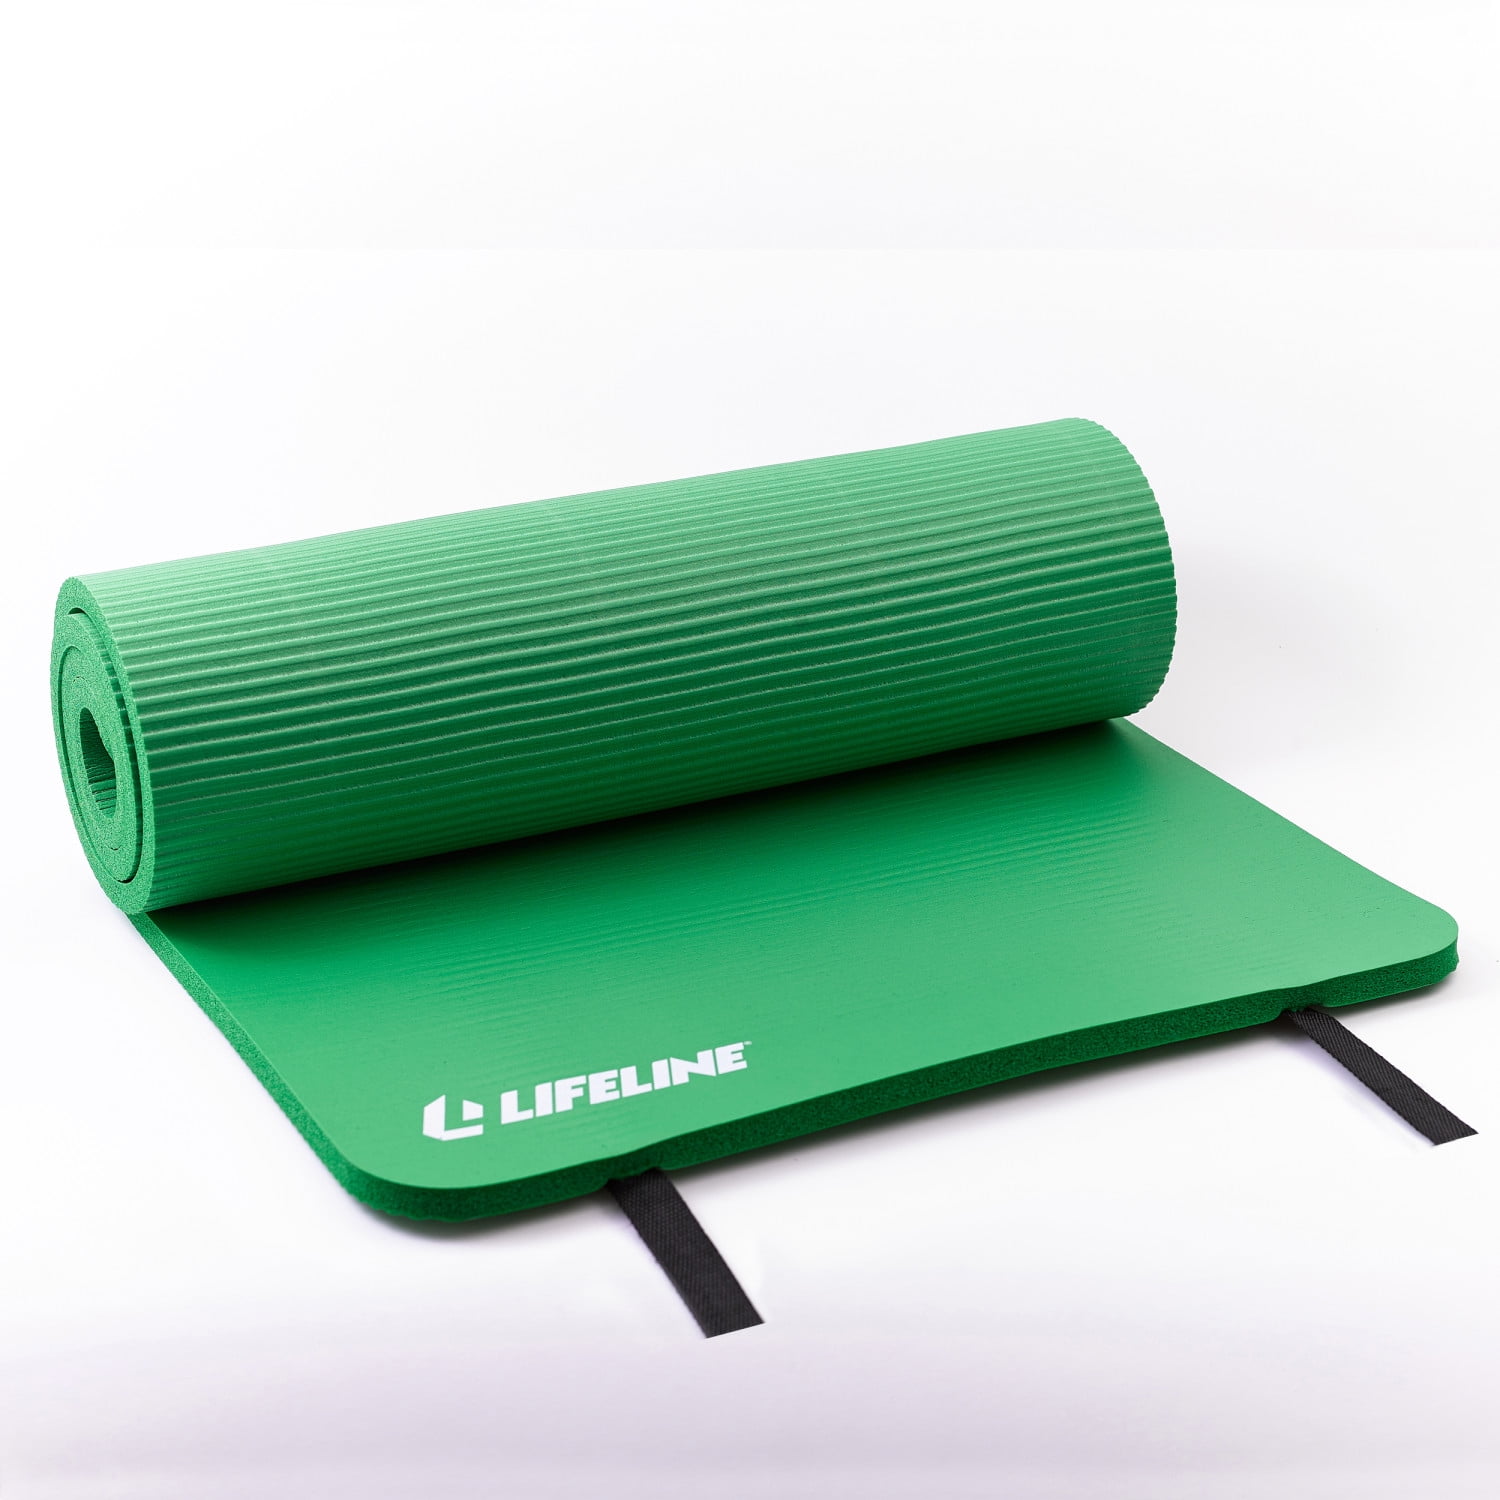 Lifeline Fitness Exercise Mat Pro - Extra Thick - Double-Sided with 5/8  Dual Texture Foam for Pilates, Stretching and Bodyweight Training 